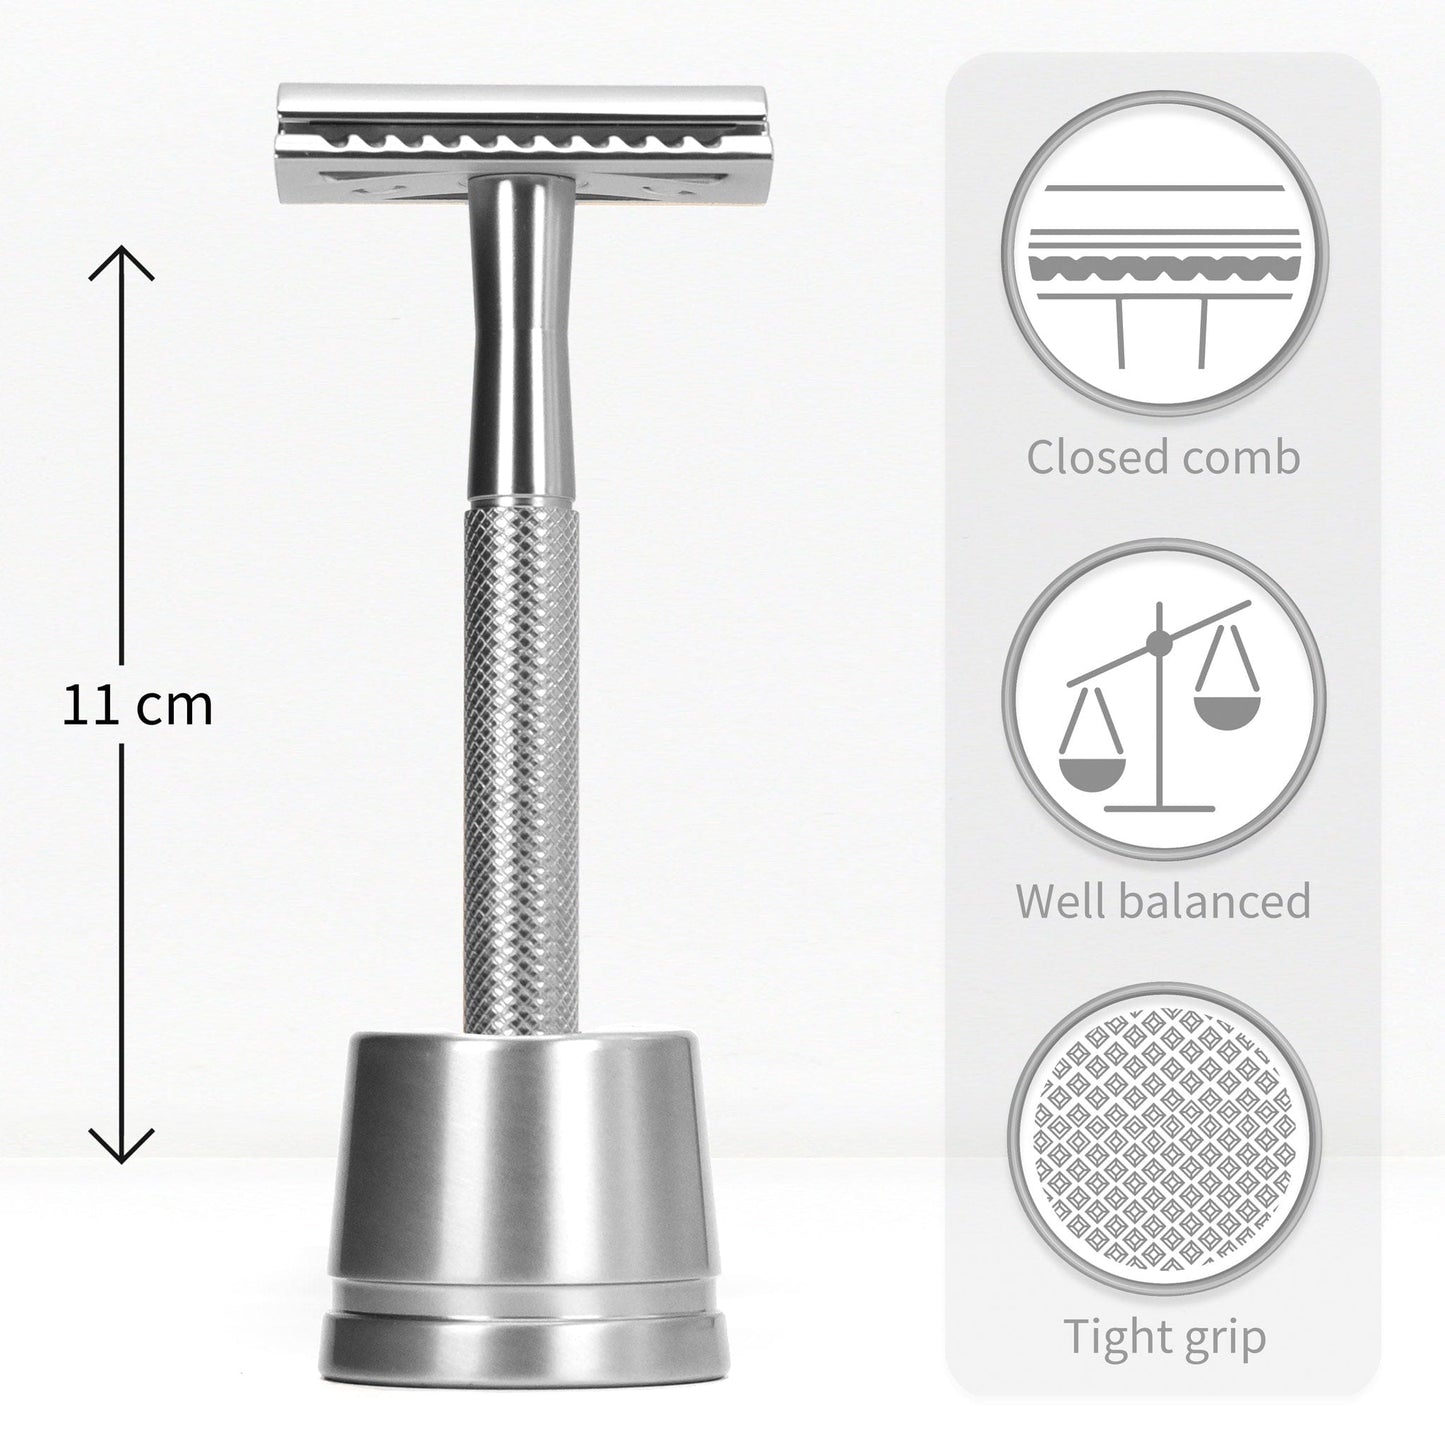 Bambaw Shaving Accessories Bambaw Stainless Steel Safety Razor + Stand